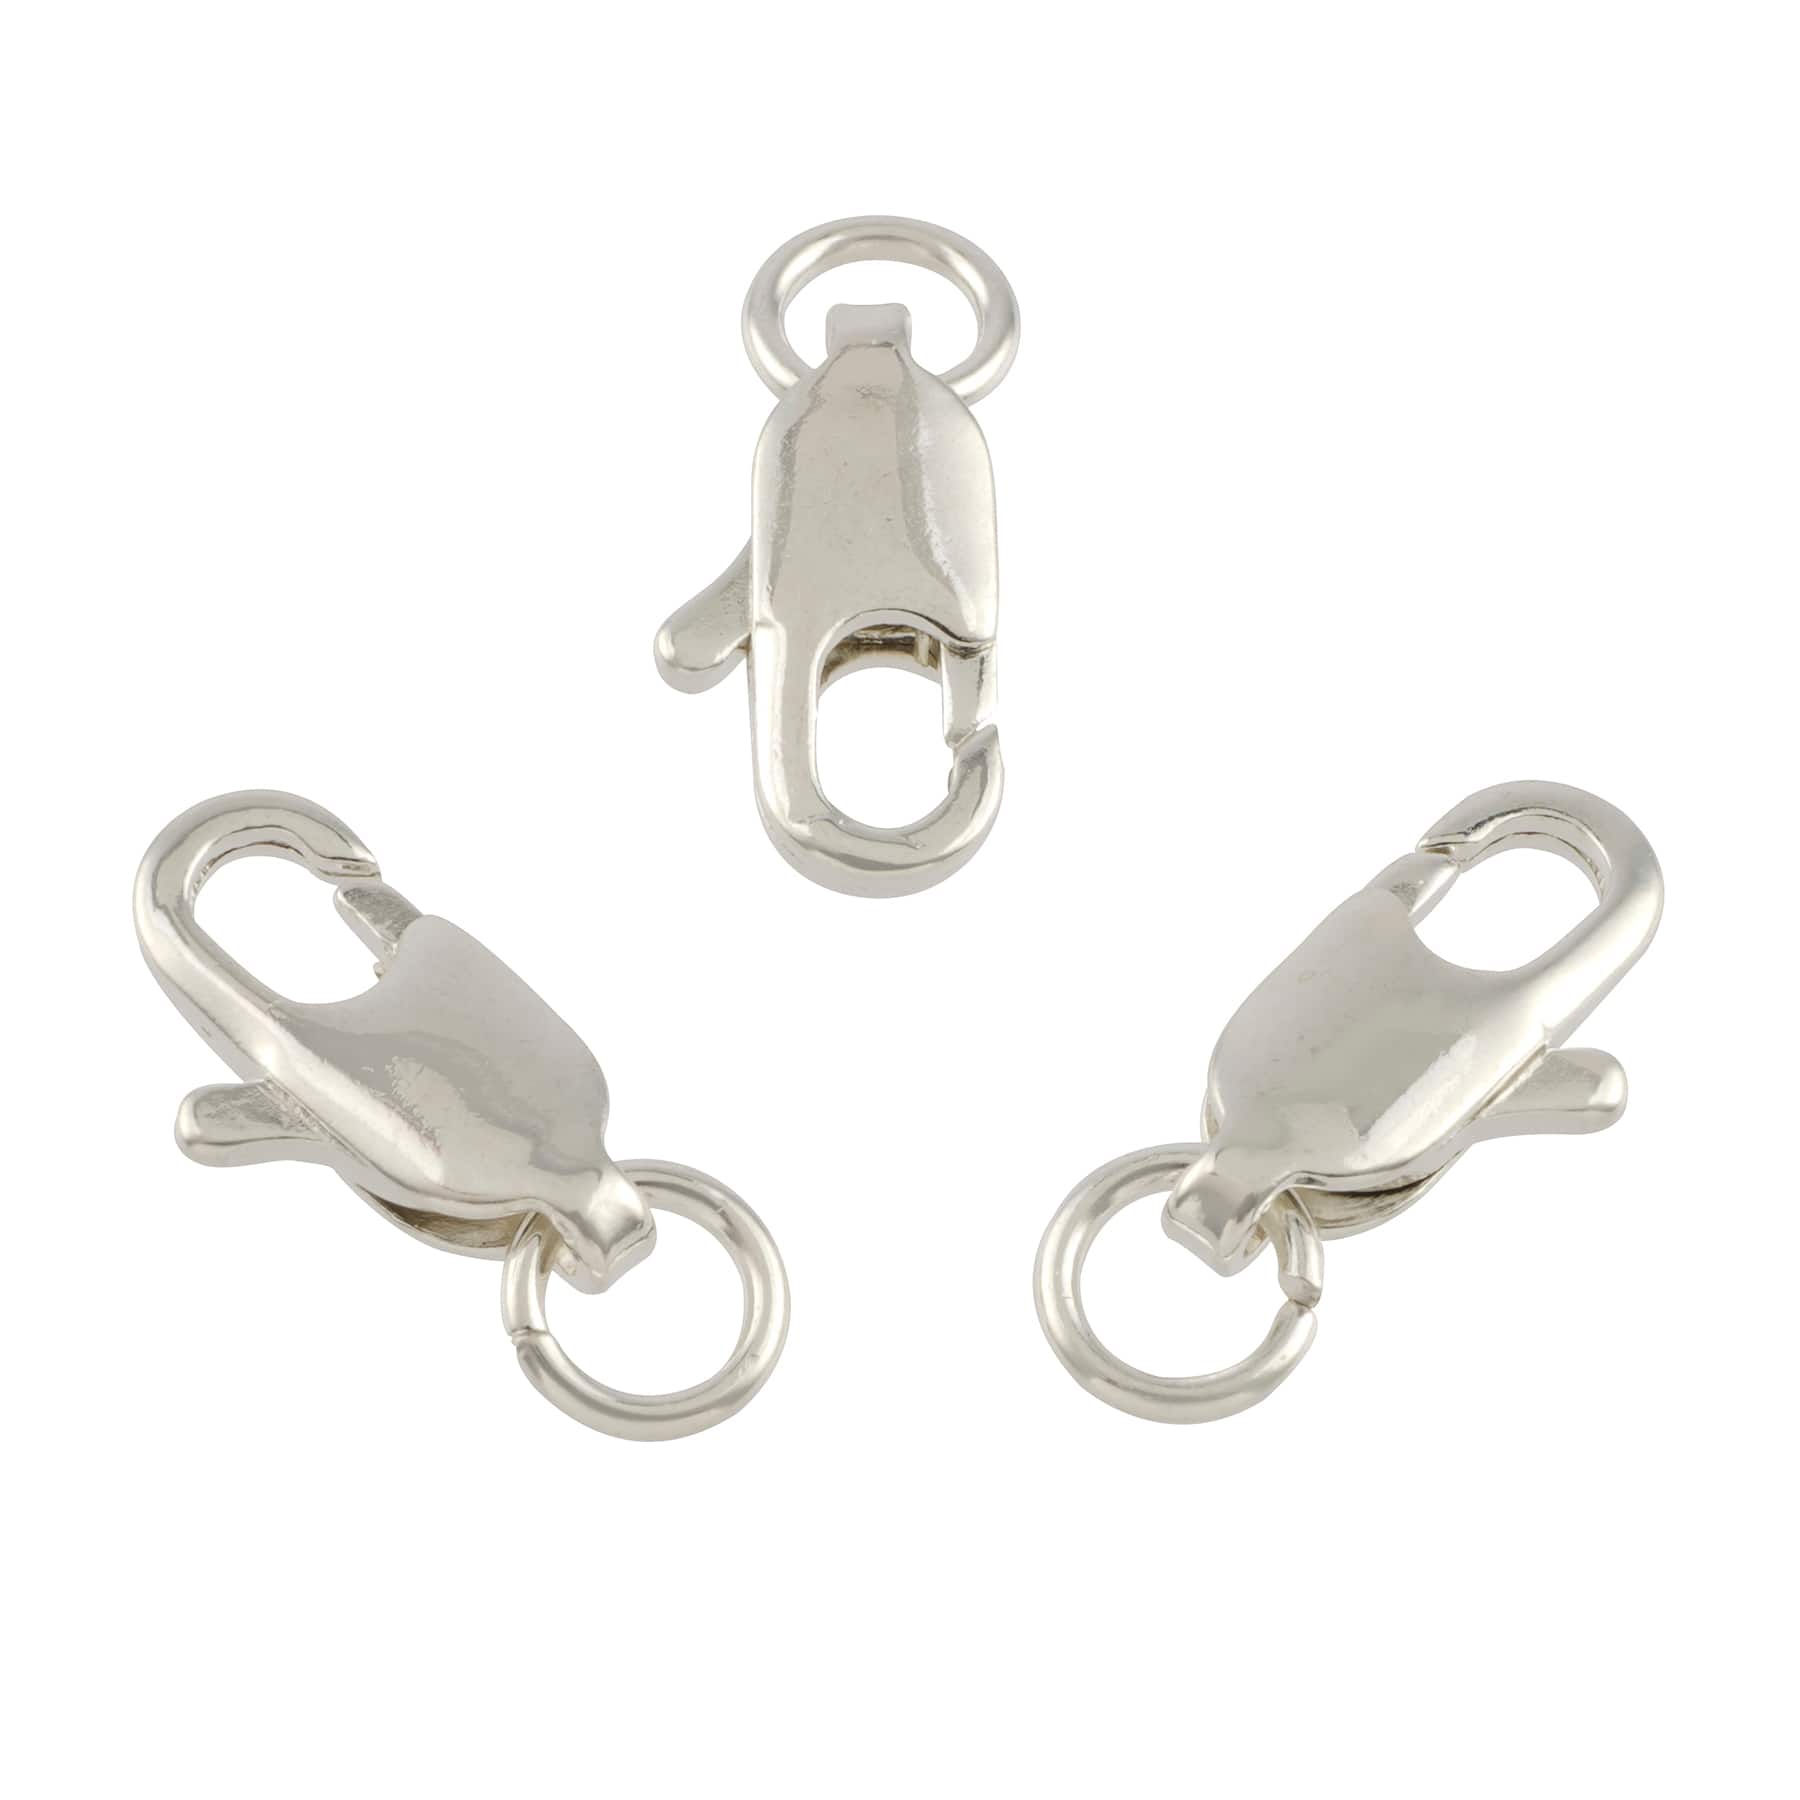 Lobster Clasps by Bead Landing&#x2122;